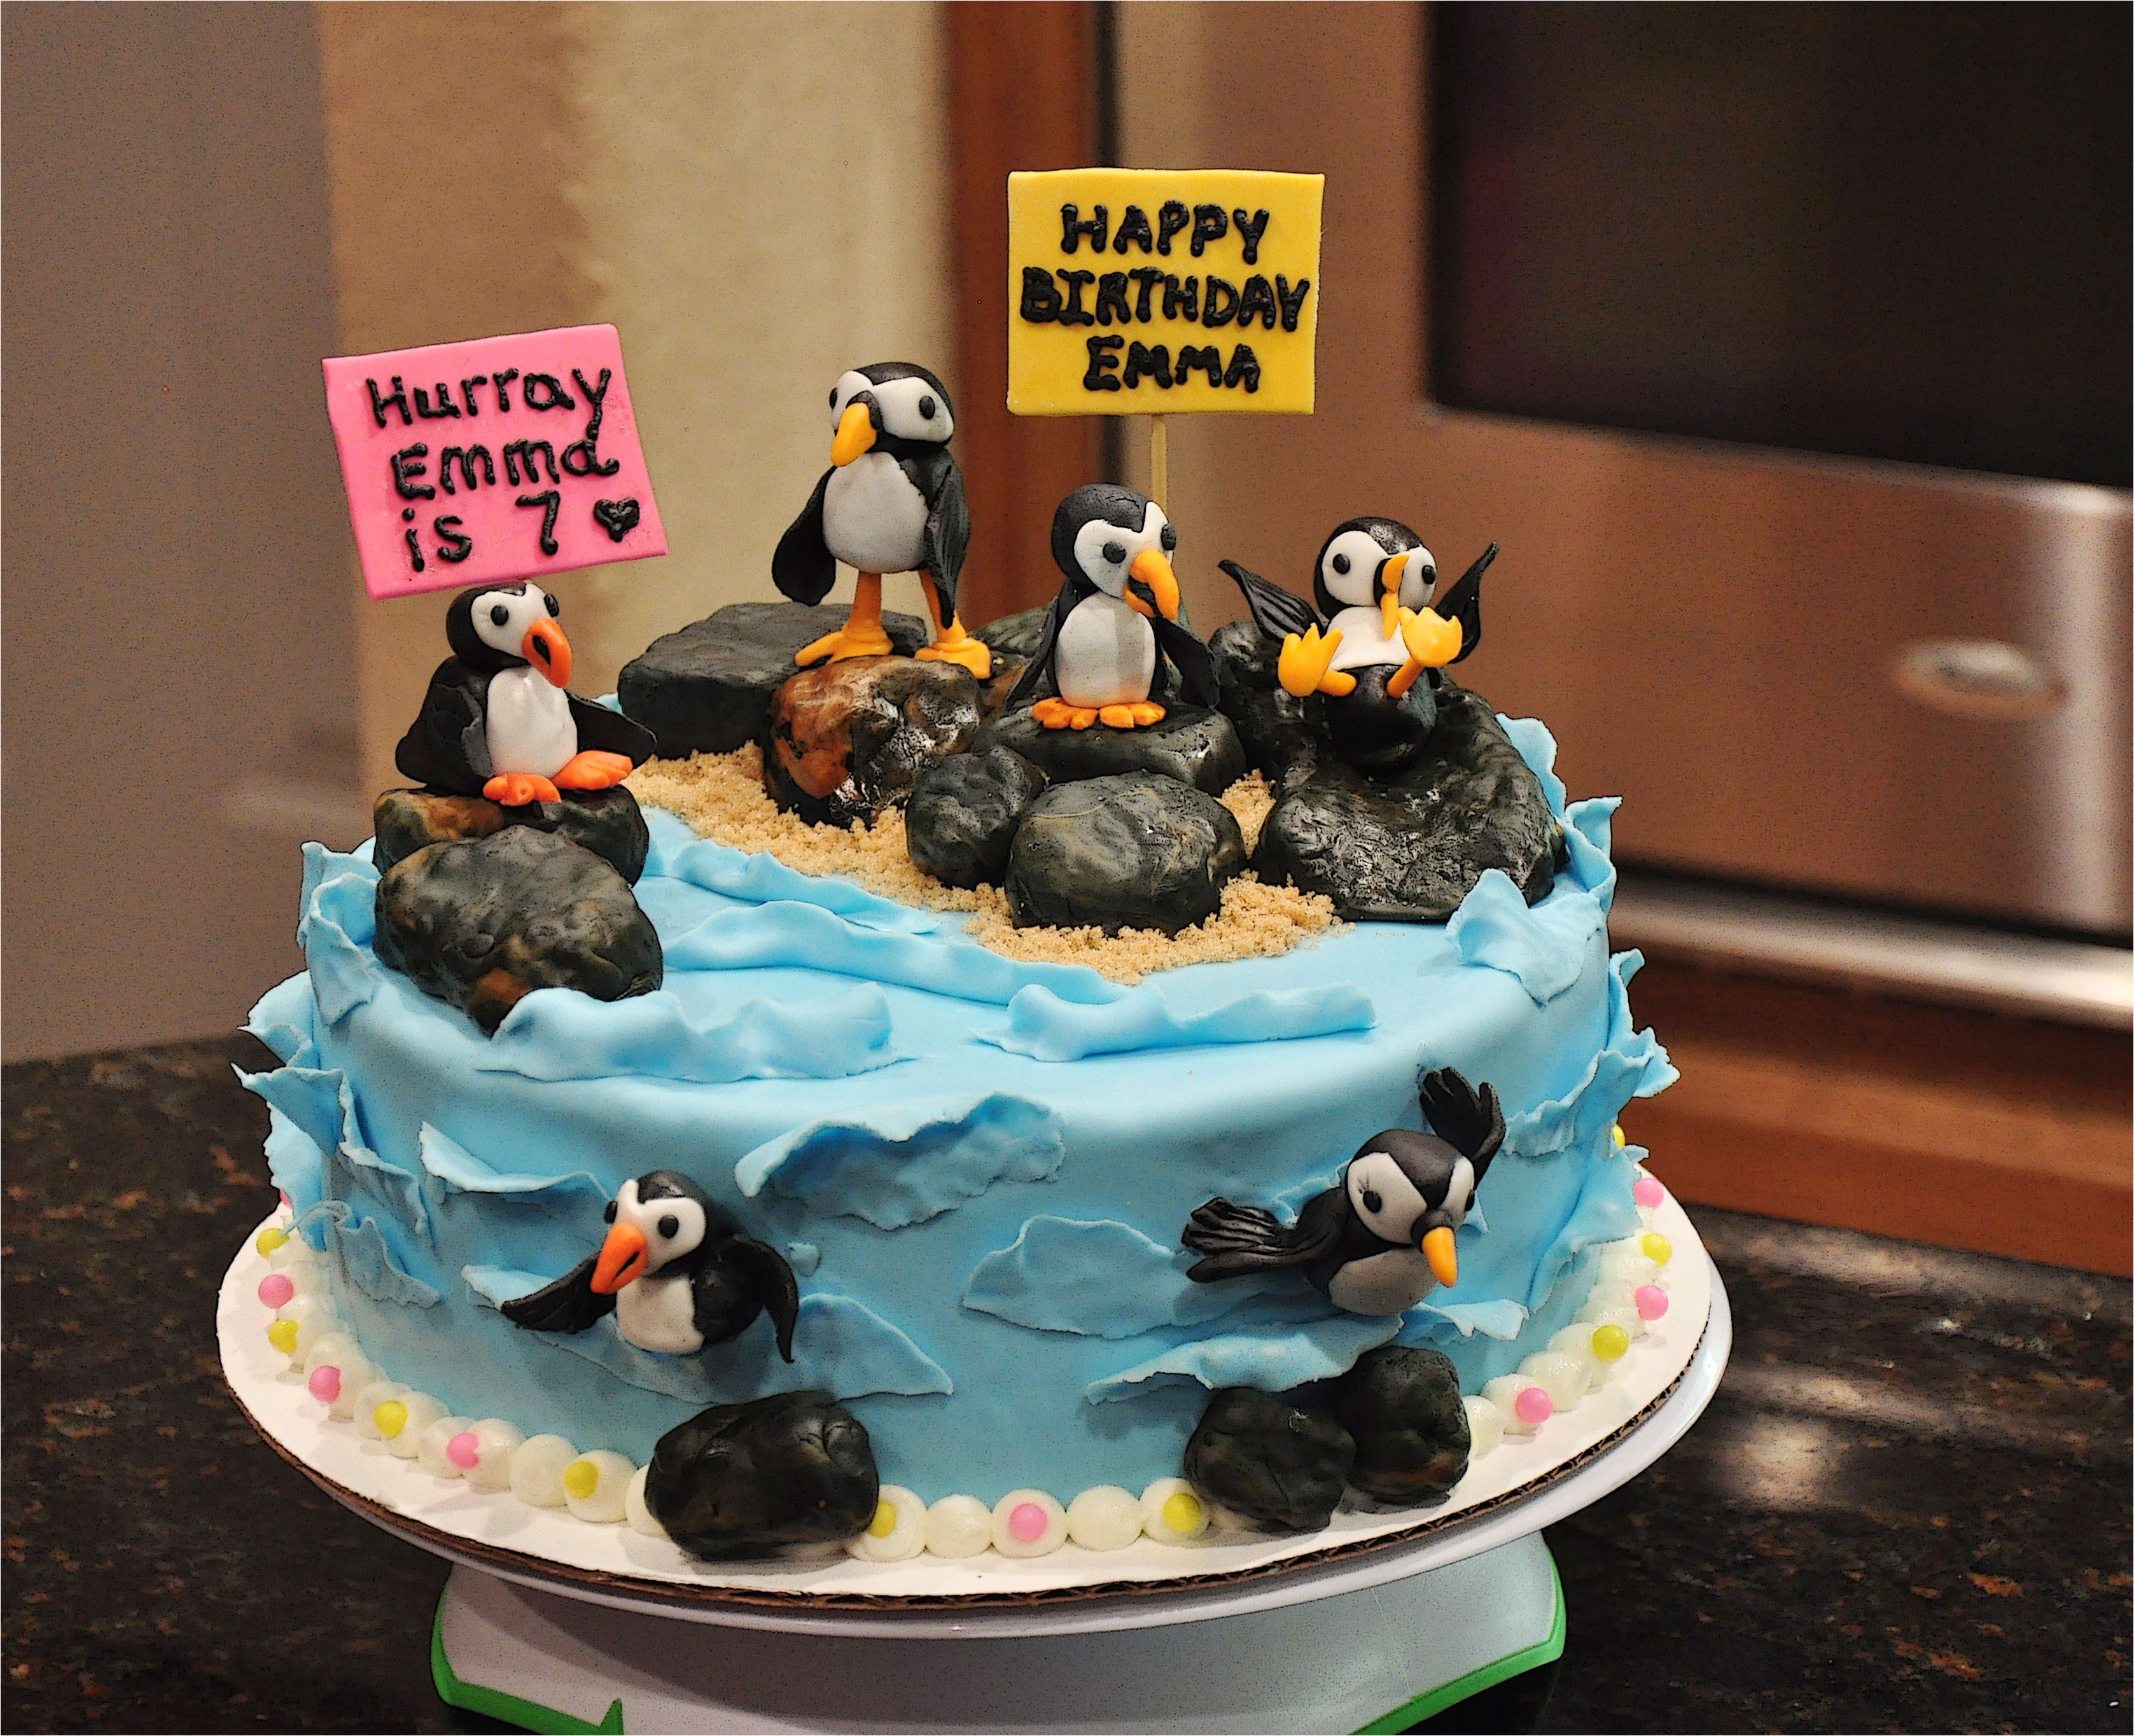 puffins on the ocean birthday cake all decorations totally edible rocks are made from rice krispie treats covered with marshmallow fondant